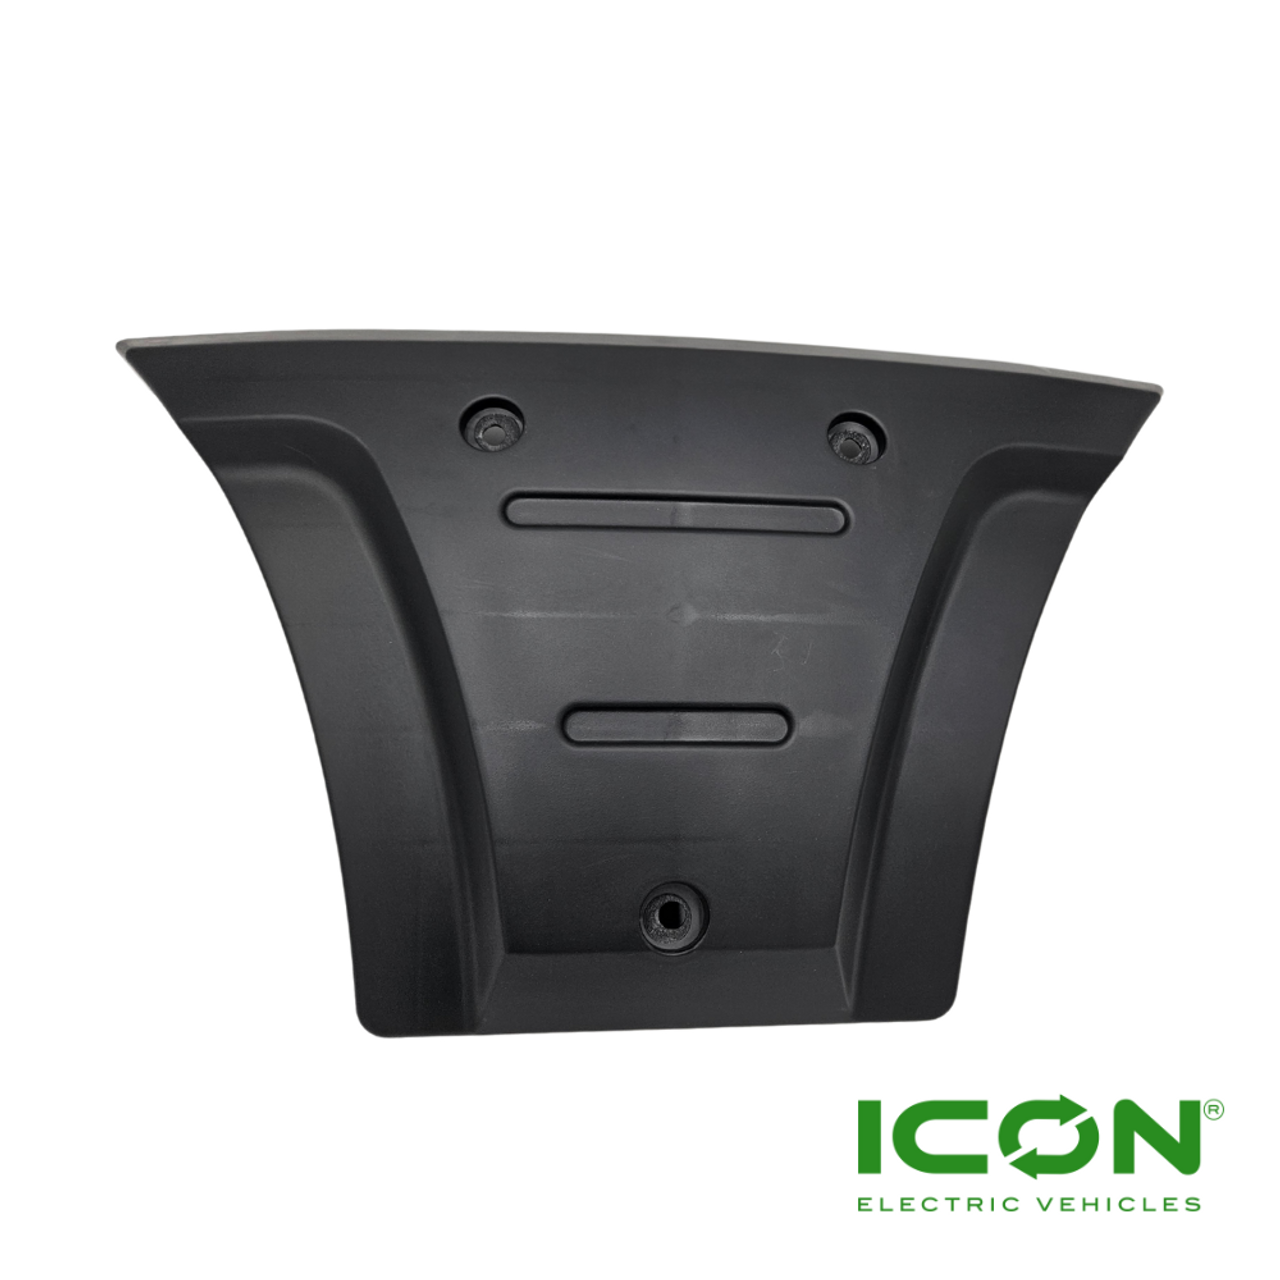 Plastic Front Bumper for Lifted ICON Golf Cart, BD-739-IC, 3.02.014.000162, 3.201.16.010004